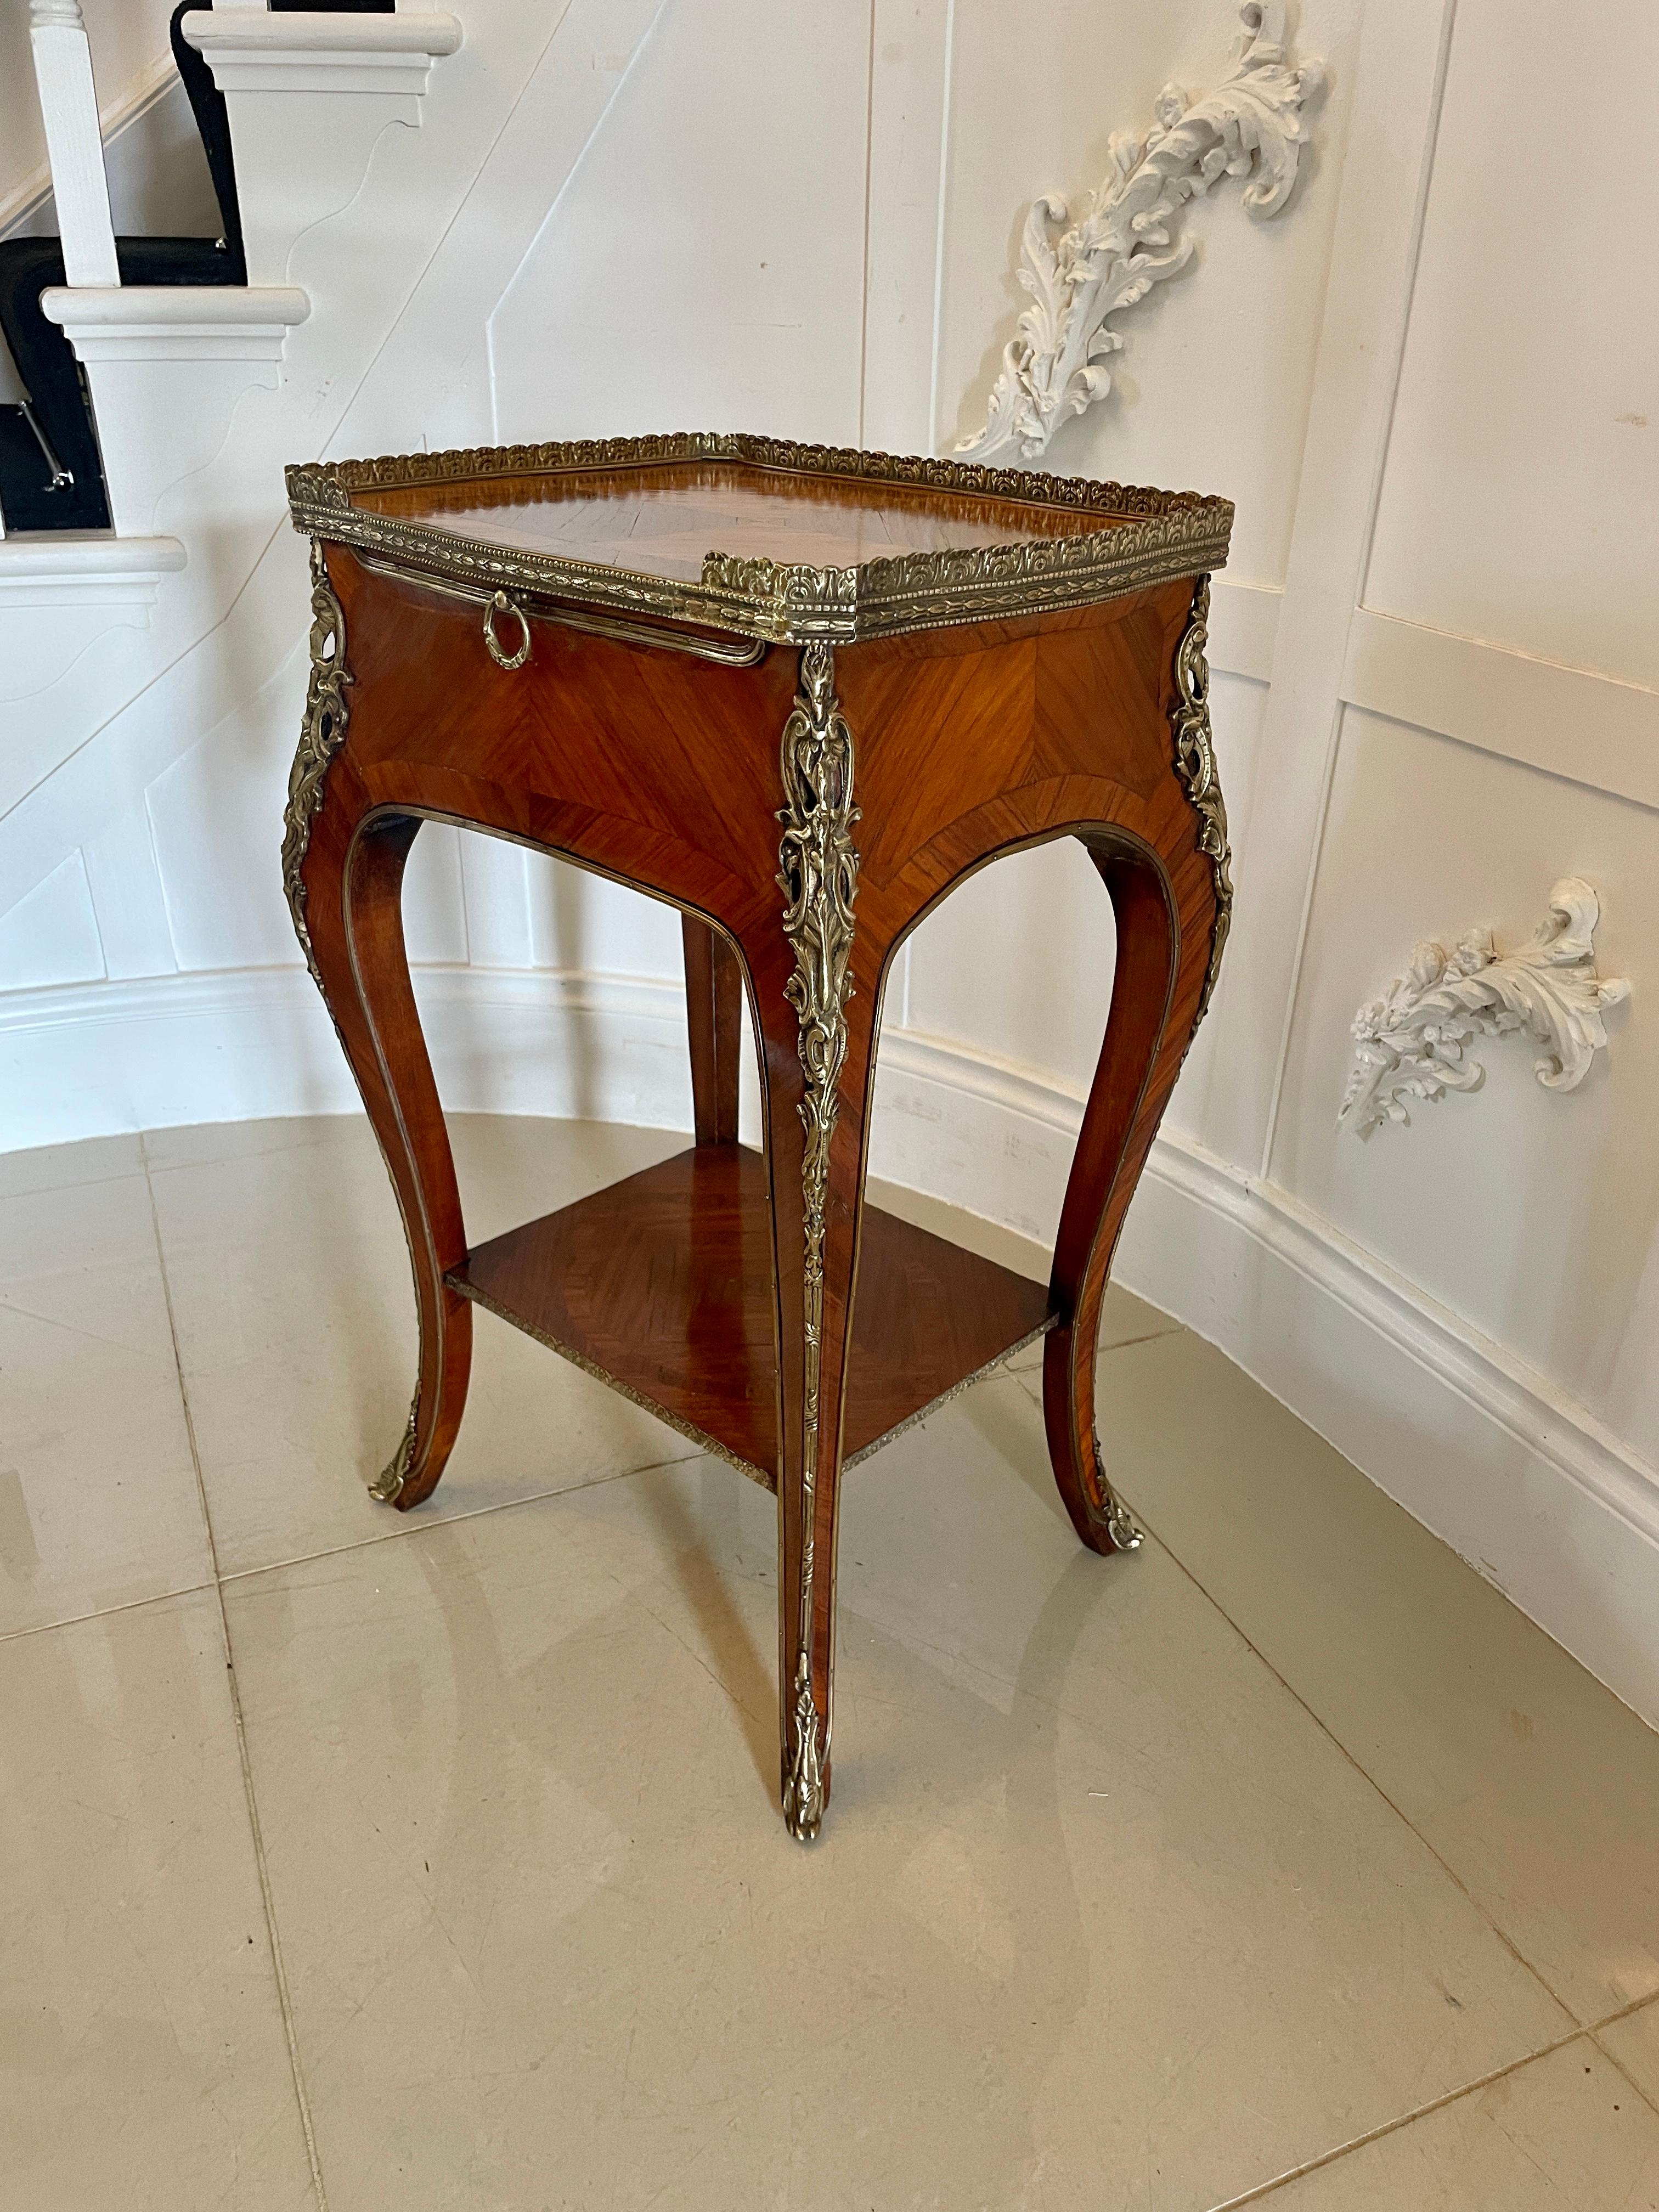 Fine Quality Antique Freestanding French Kingwood and Ormolu Mounted Lamp Table For Sale 8